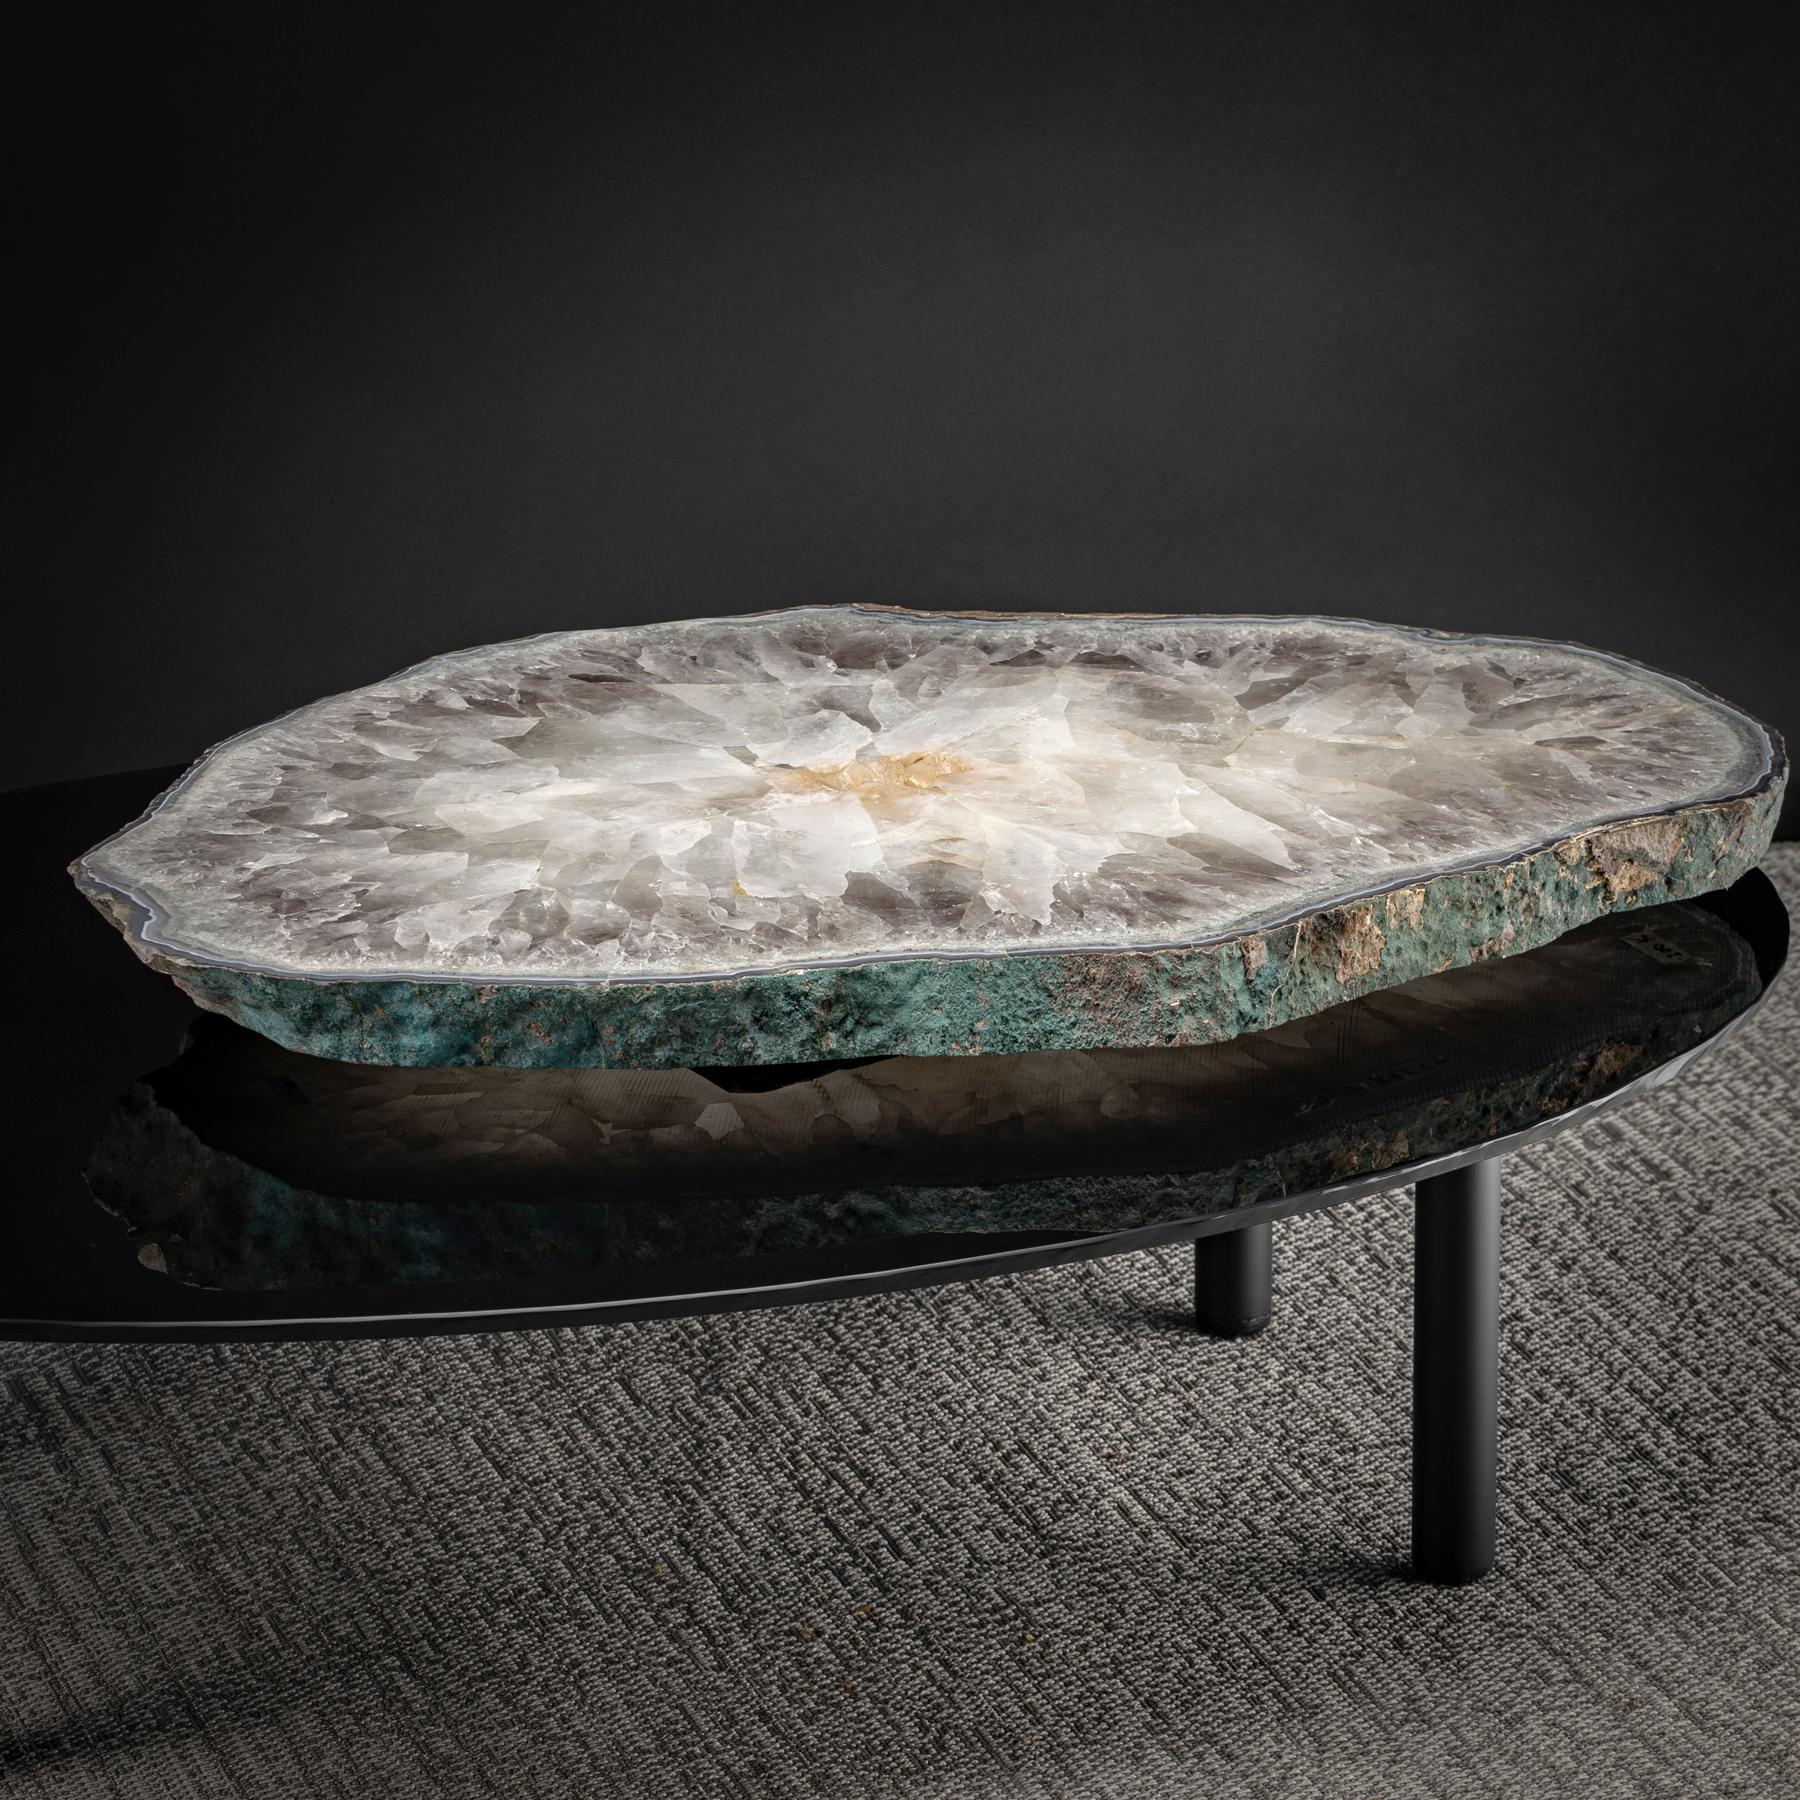 Mexican Center Table, with Rotating Brazilian Agate on Black Tempered Glass